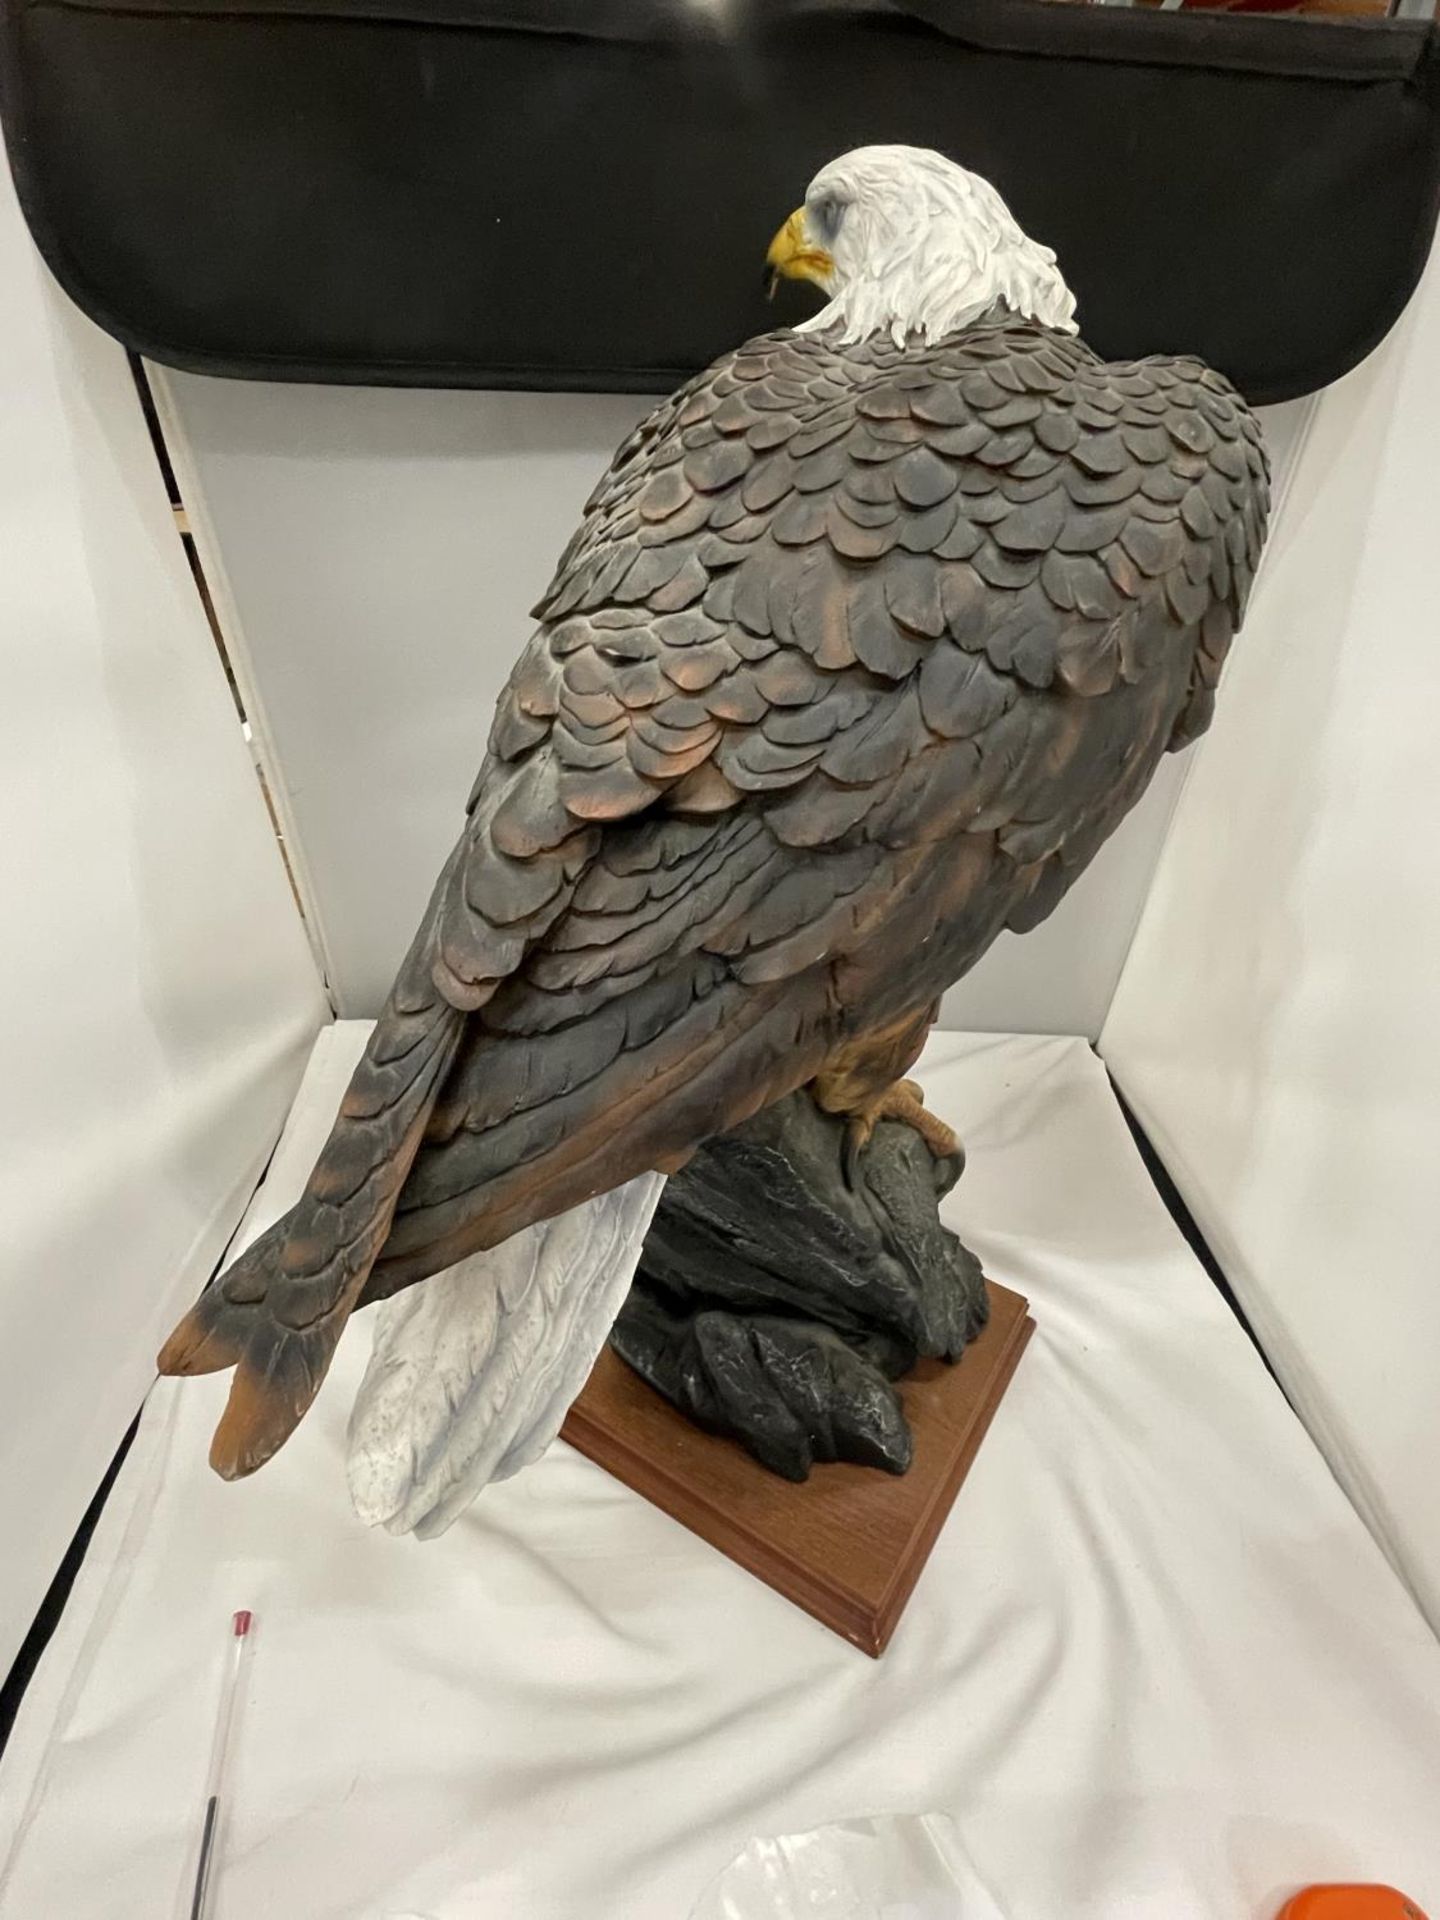 A LARGE RESIN FIGURE OF A BALD EAGLE HEIGHT - Image 4 of 4